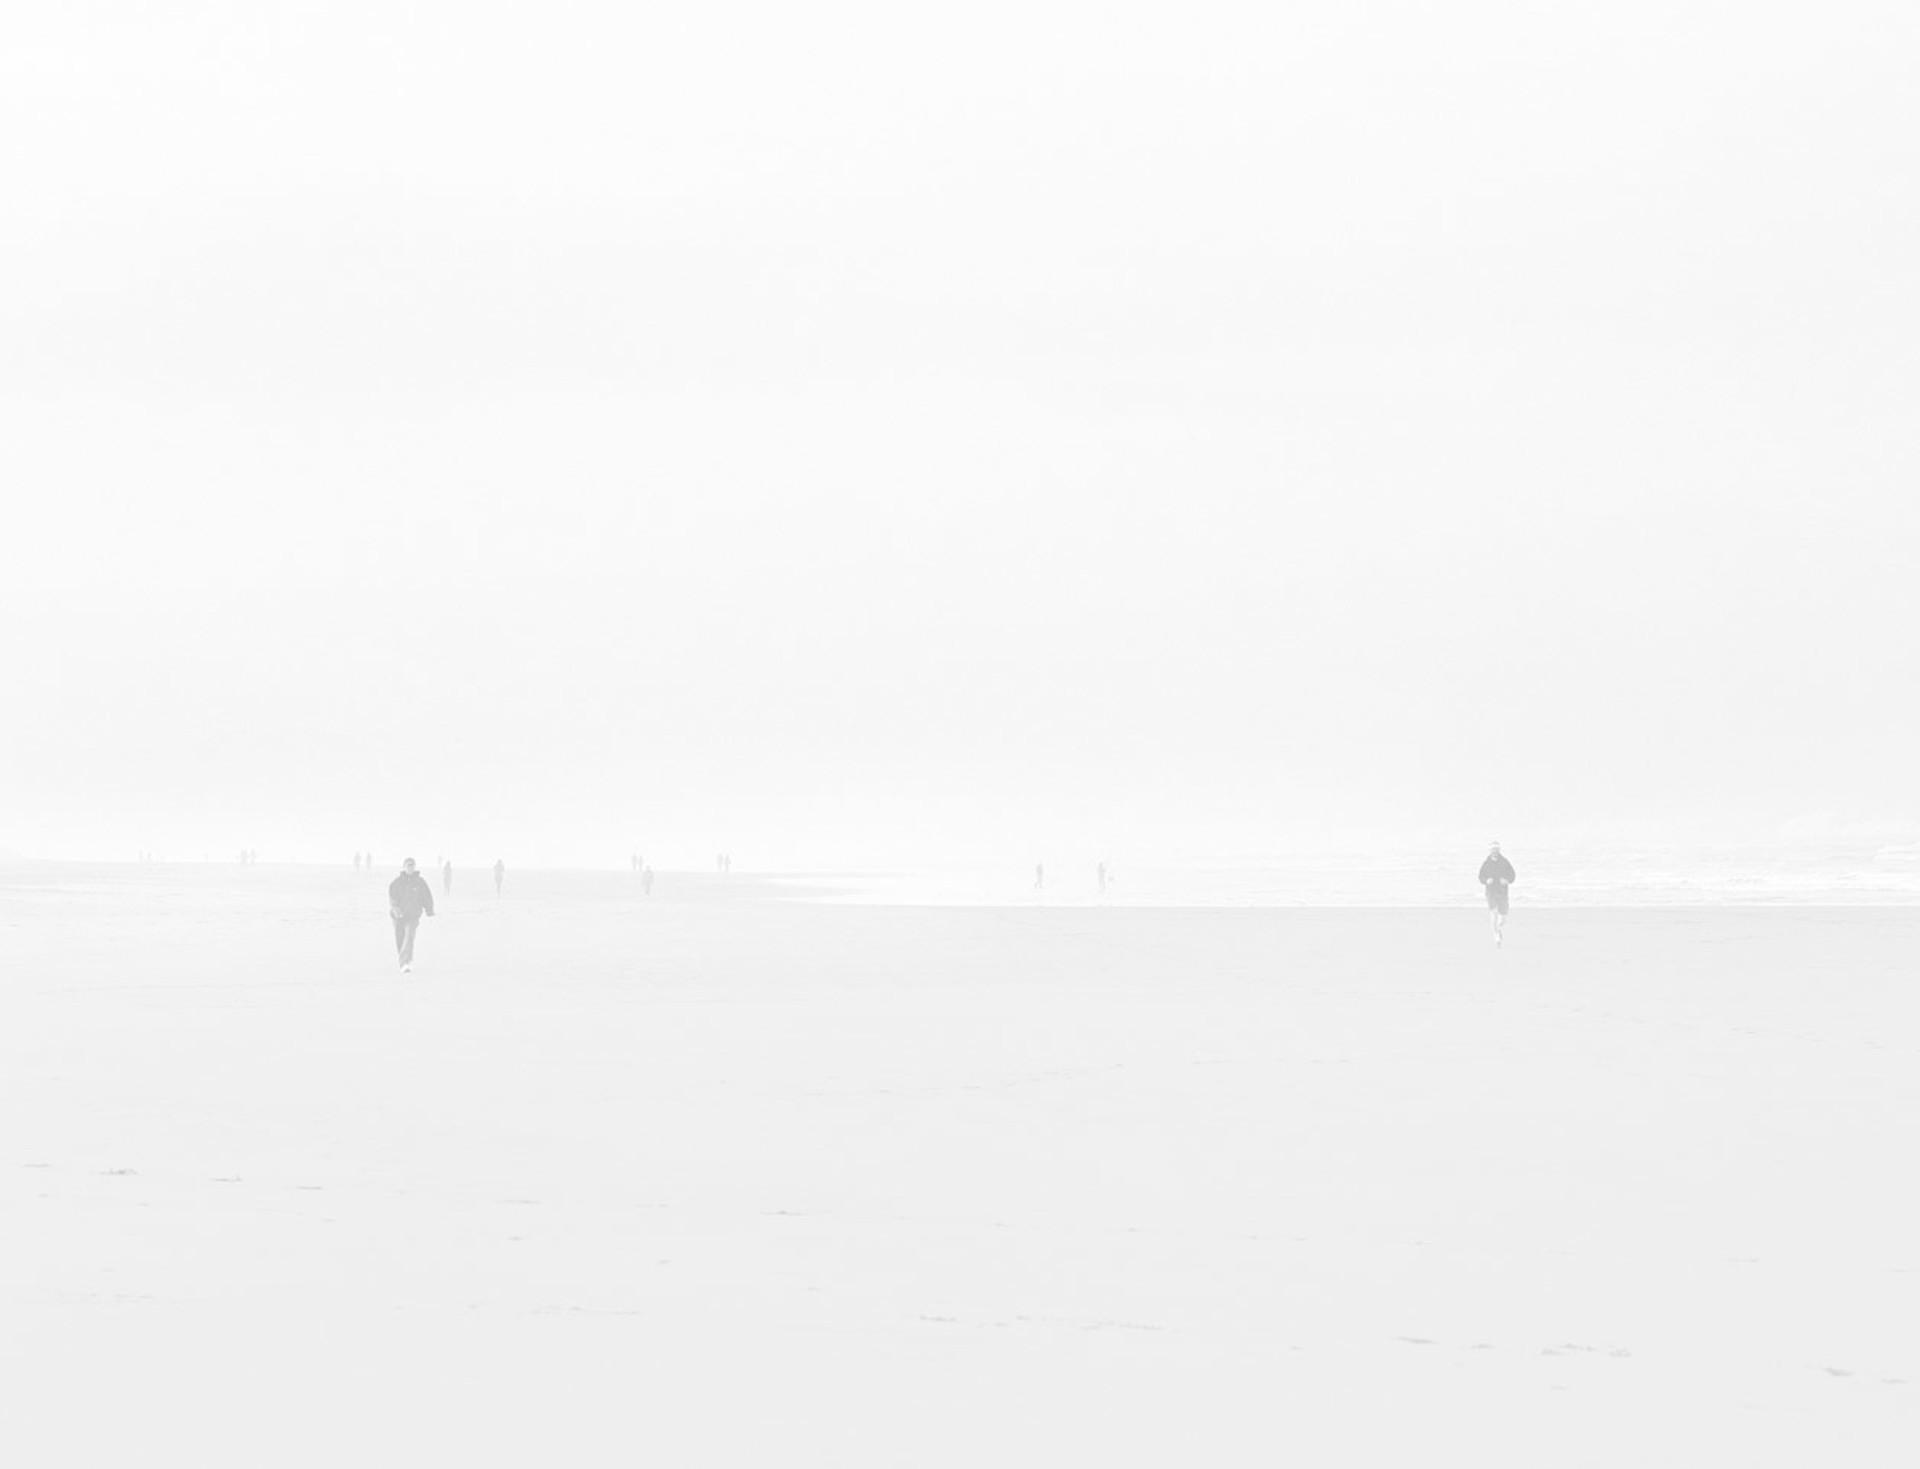 Wanderers in a Sea of Fog 6 by Tressa Pack